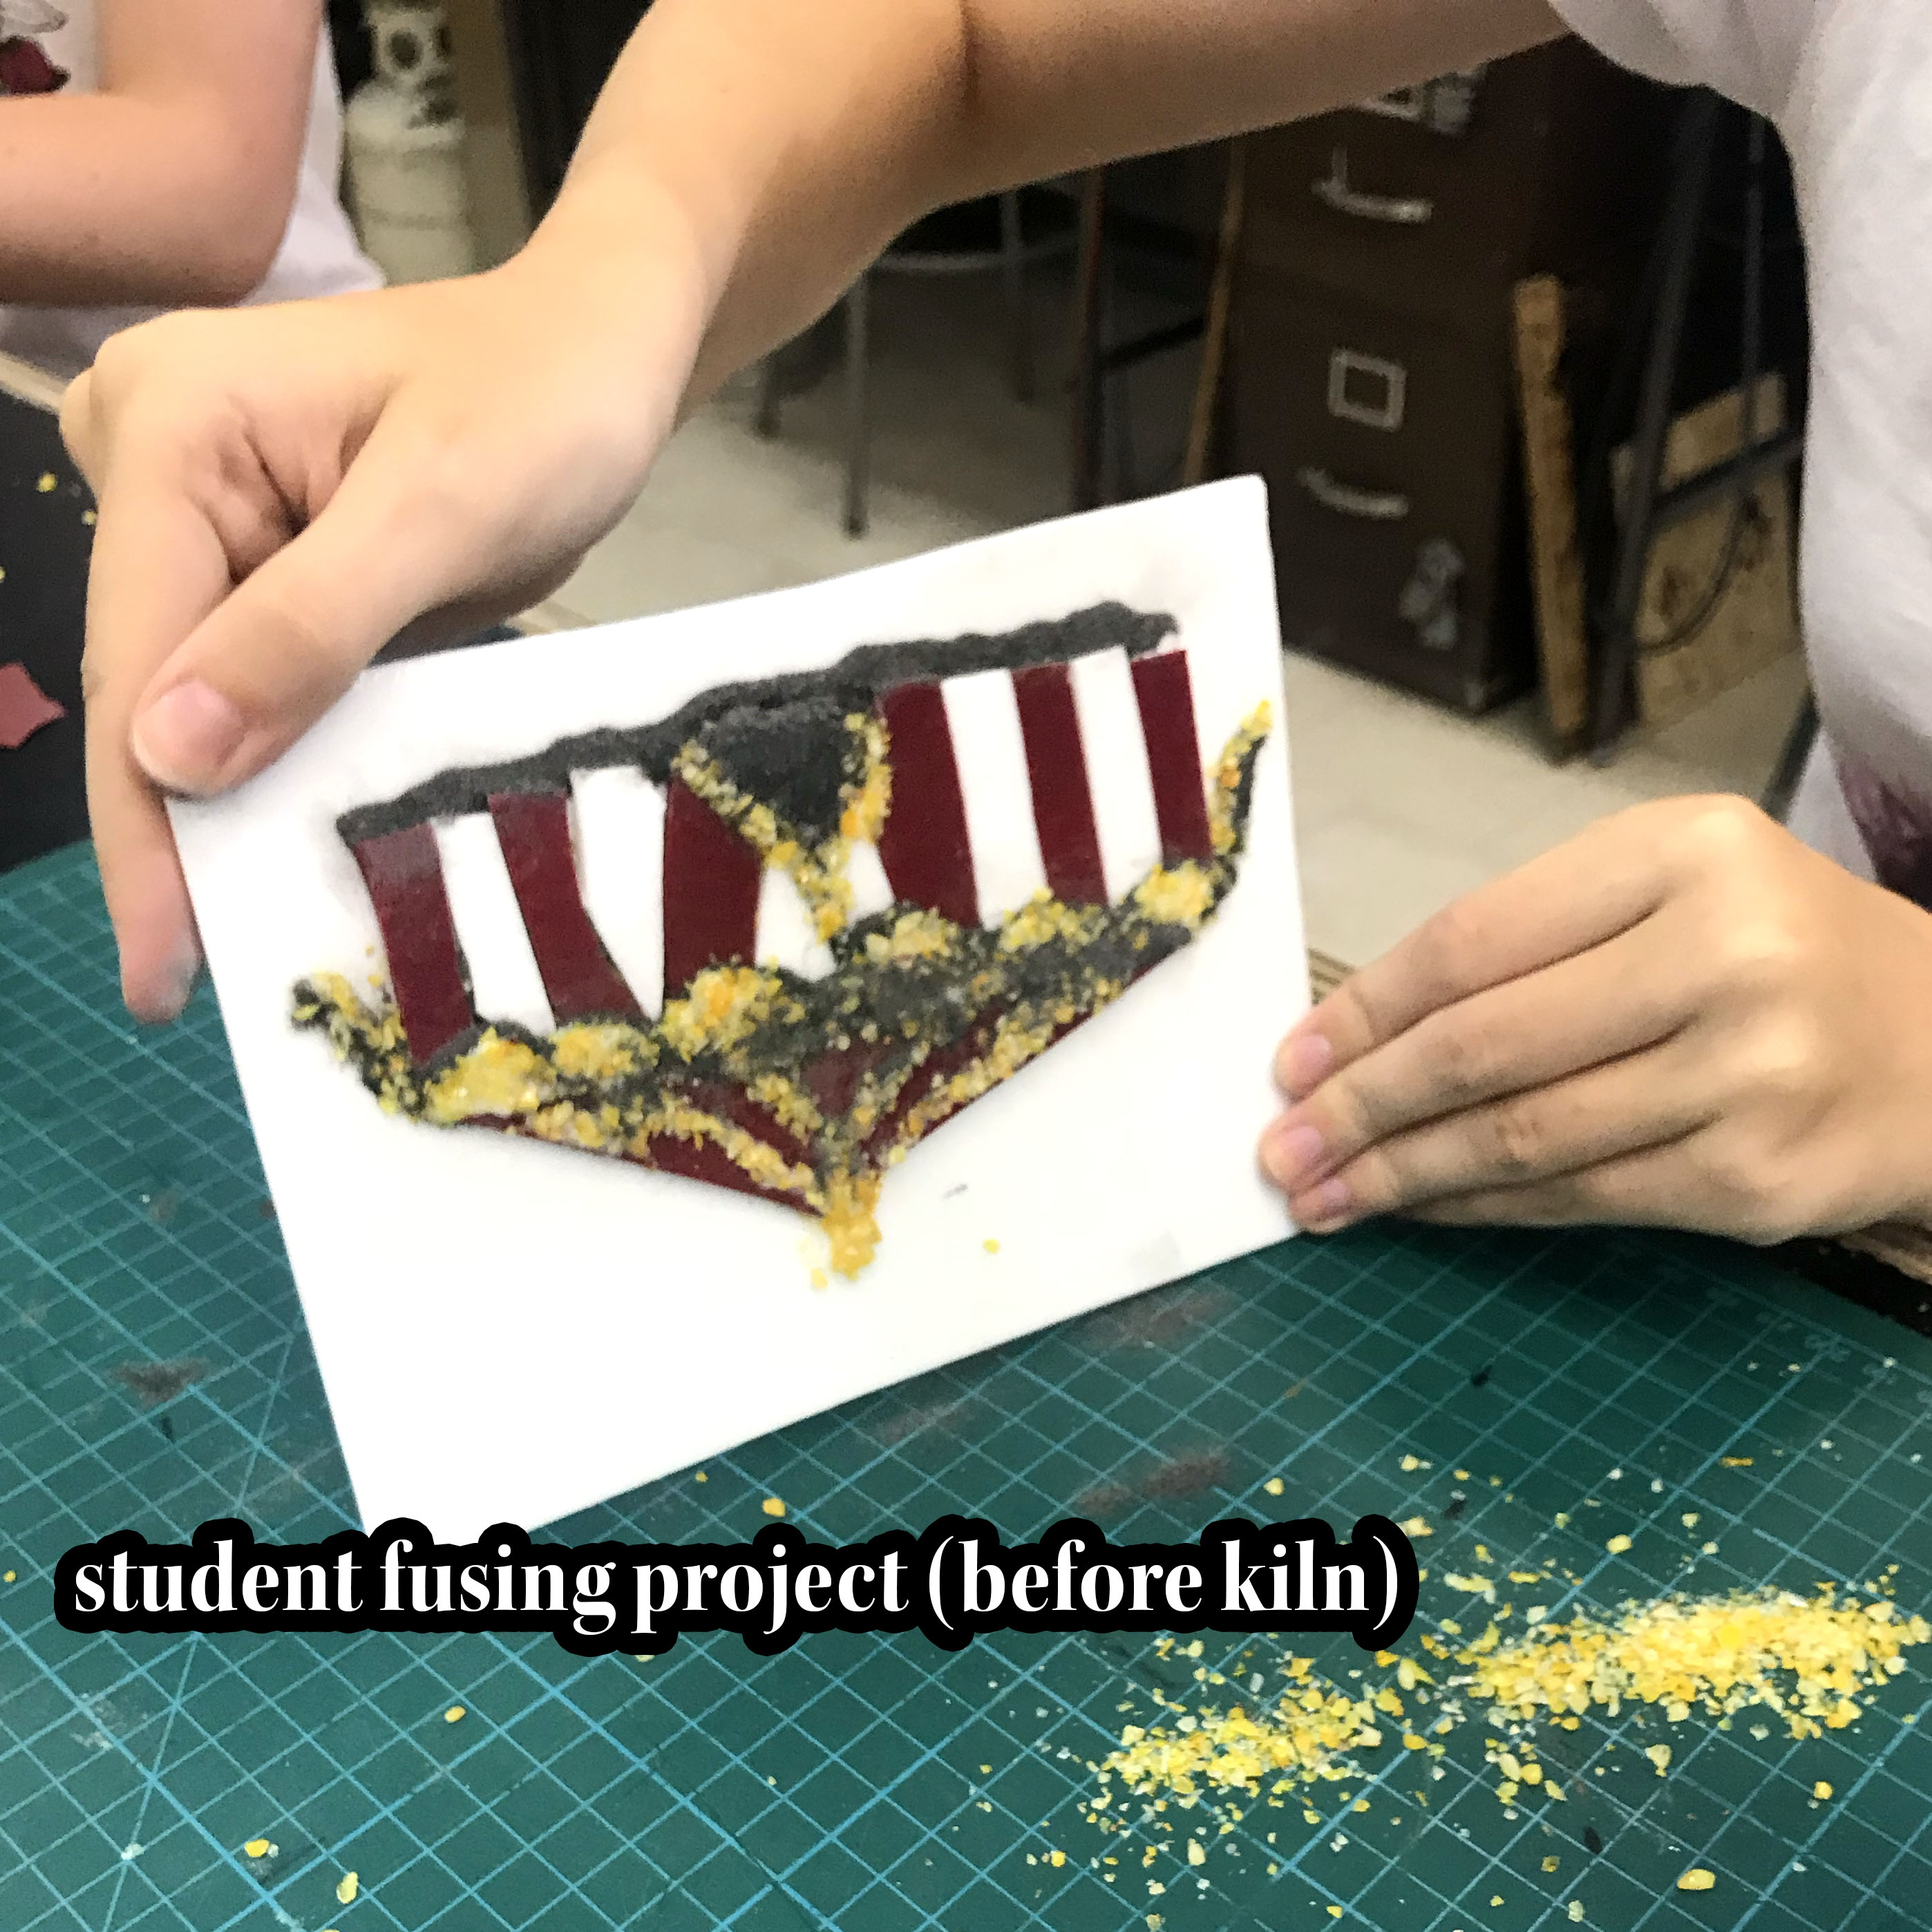 student tapping off excess glass from their fusing project. image is of a circus tent